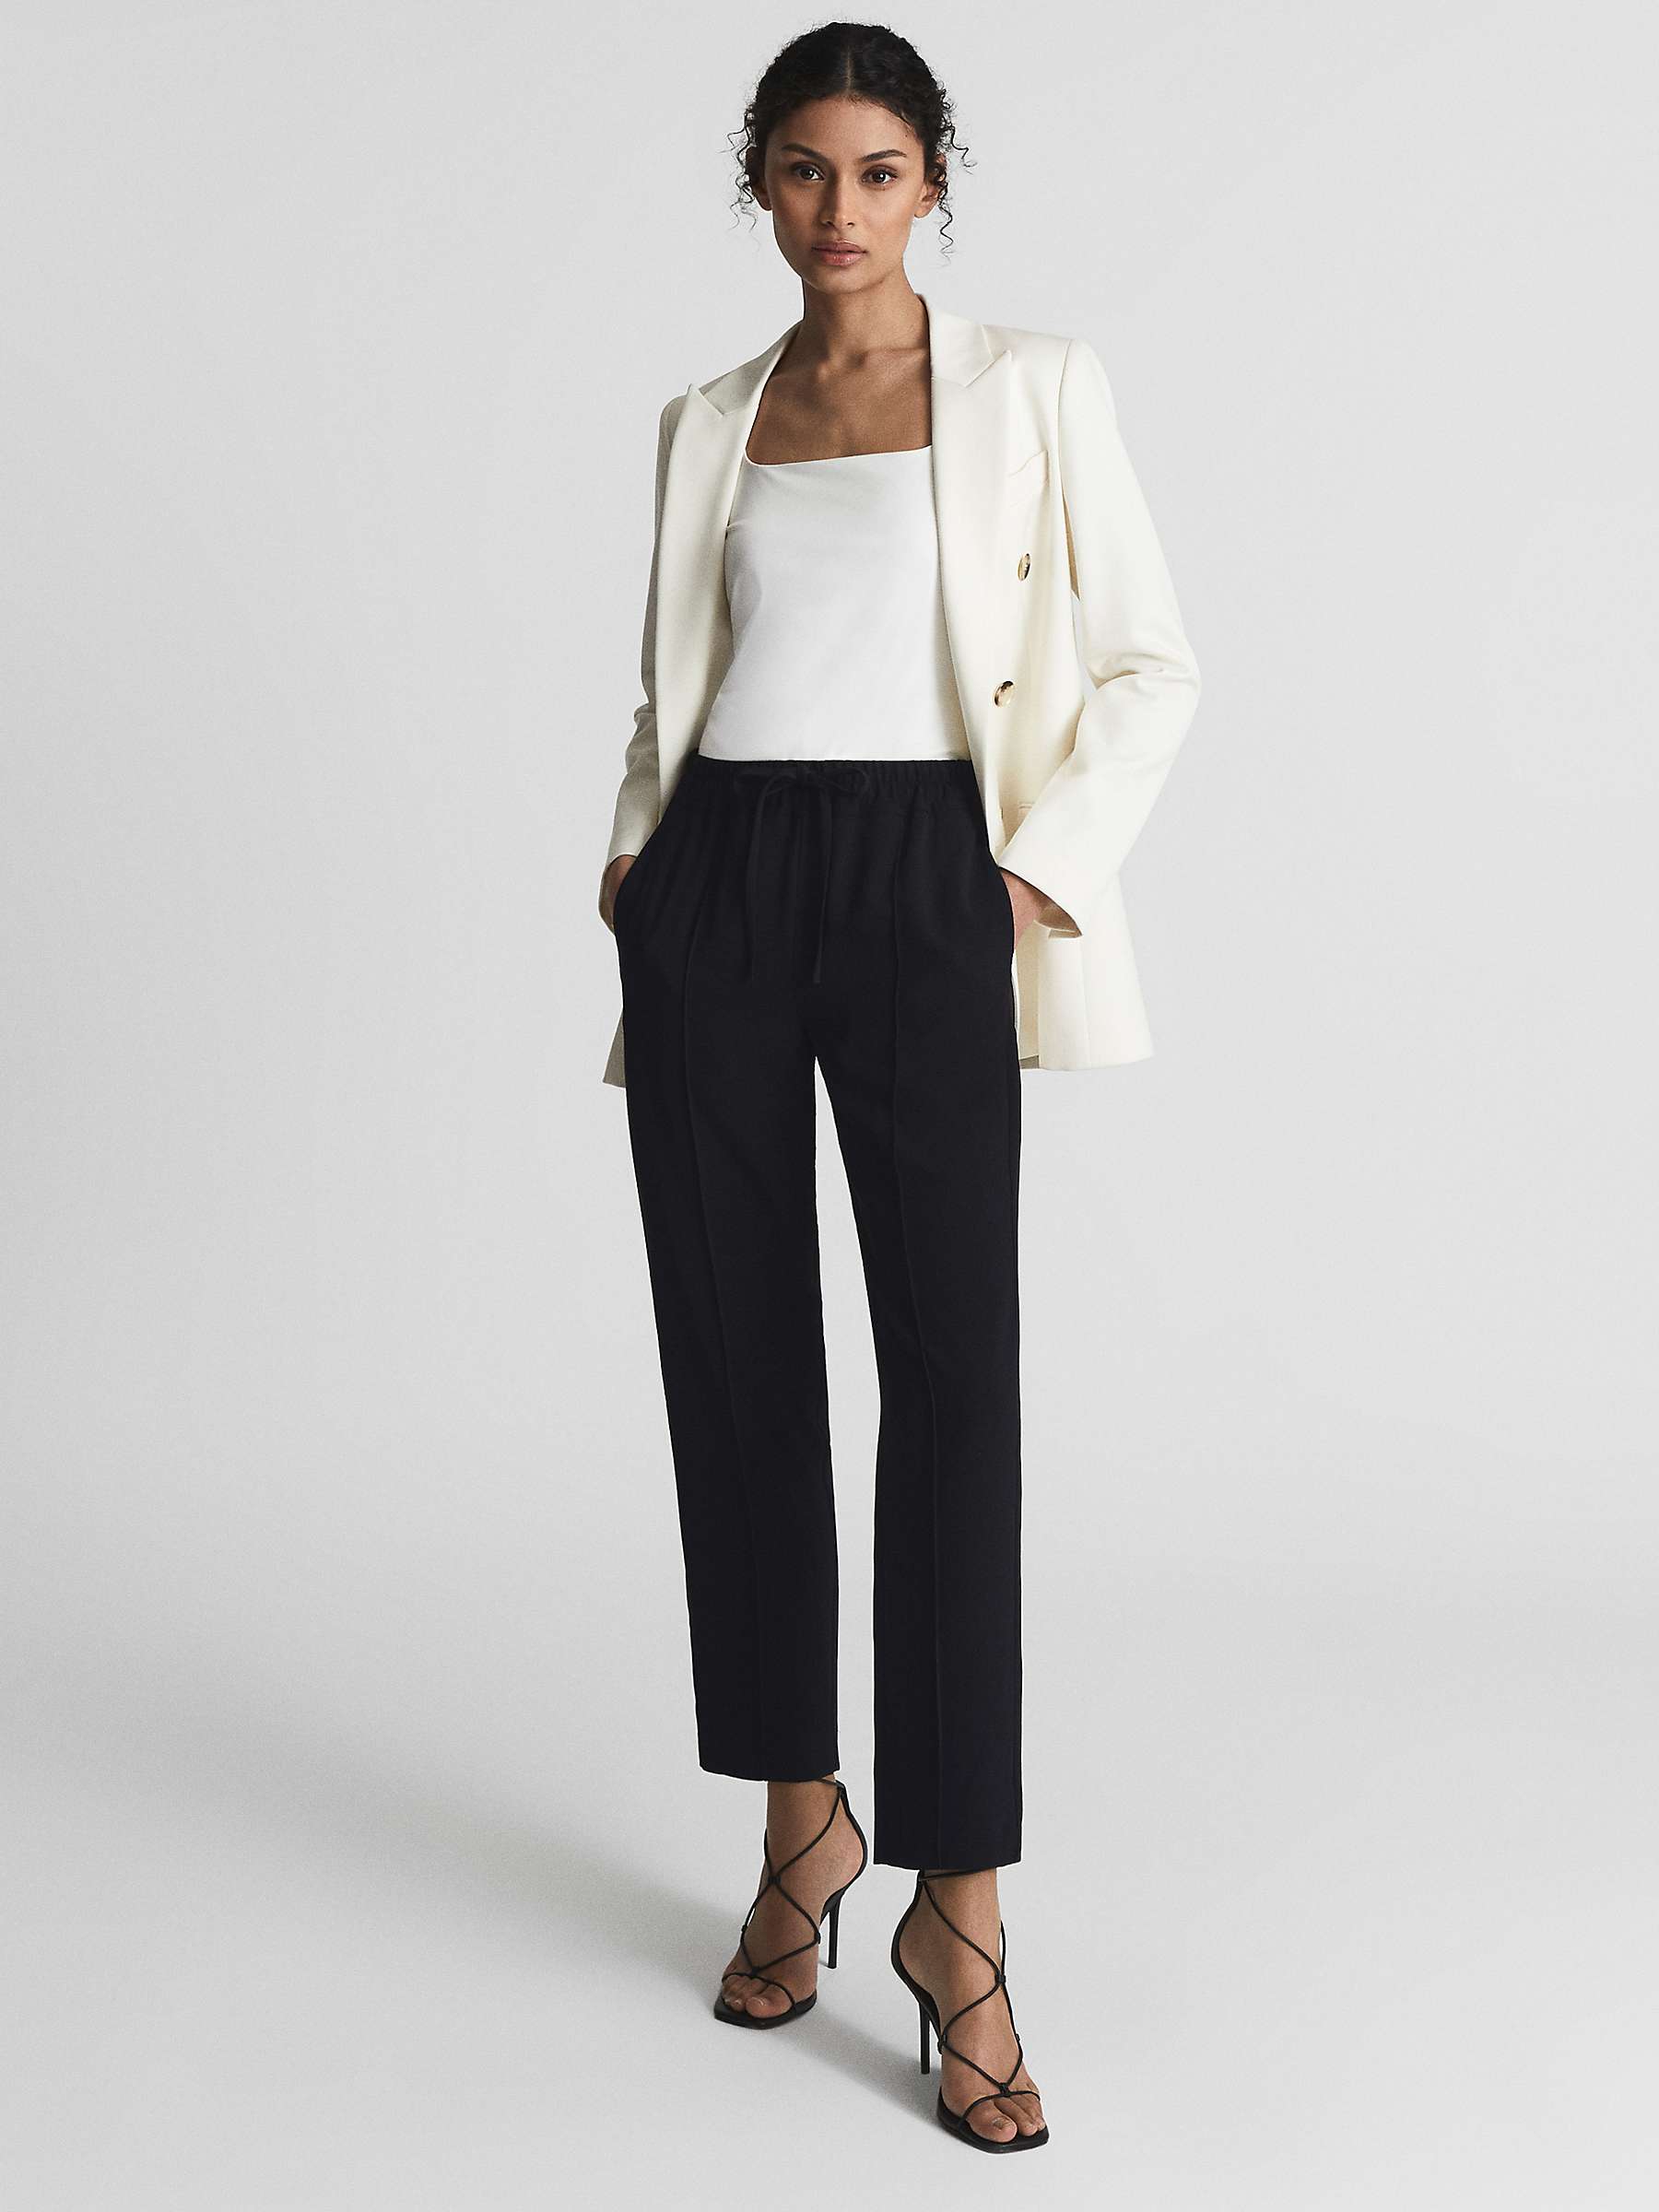 Buy Reiss Hailey Cropped Trousers Online at johnlewis.com